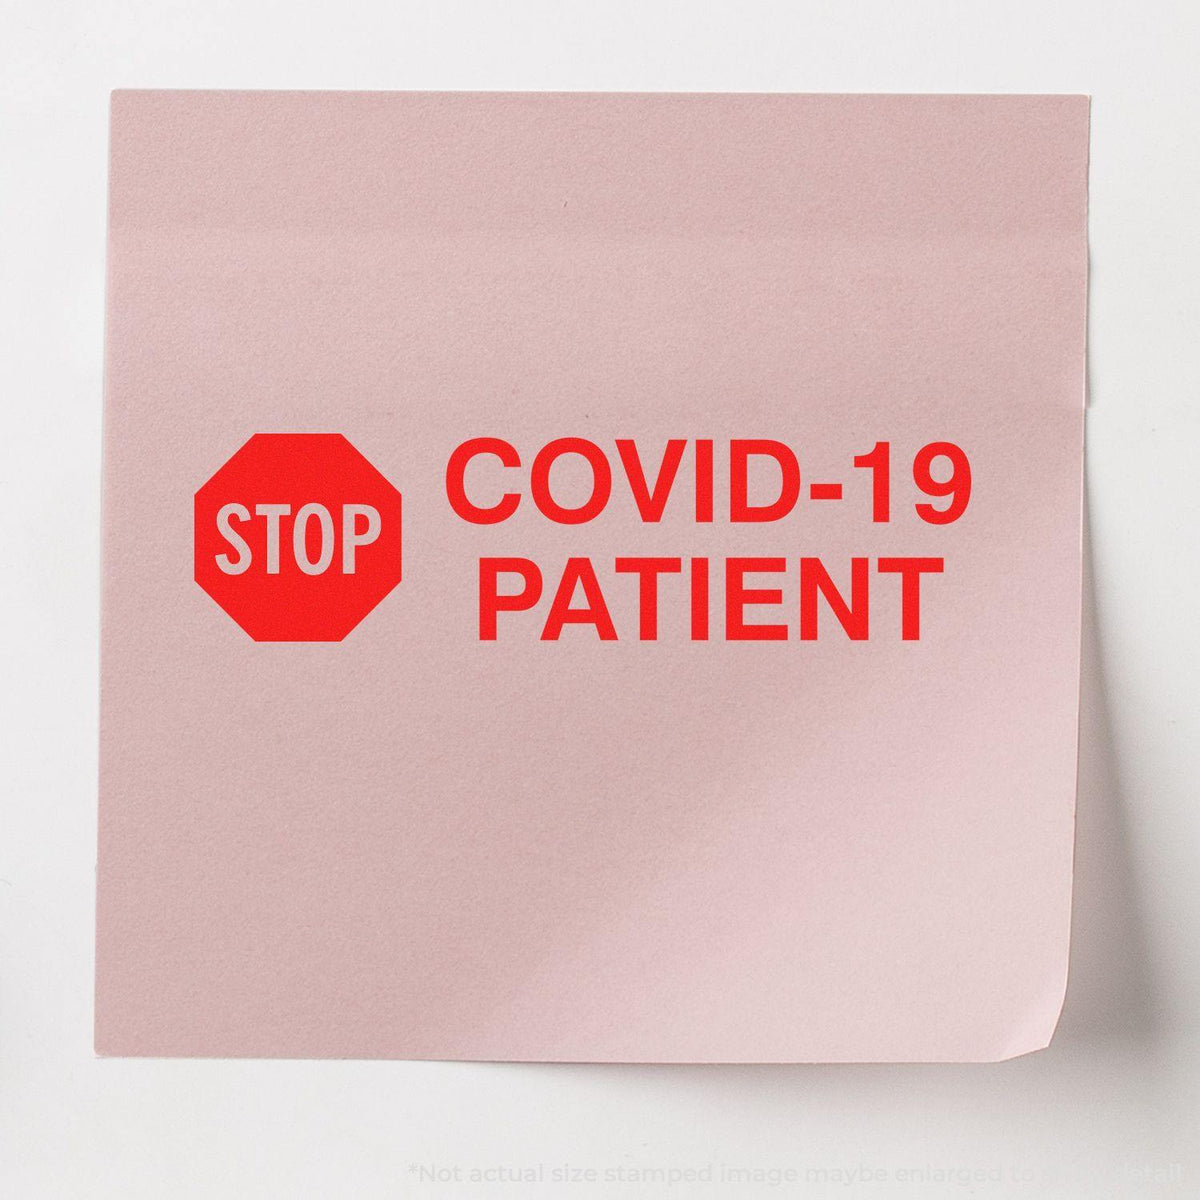 Self-Inking Stop Covid Patient Stamp - Engineer Seal Stamps - Brand_Trodat, Impression Size_Small, Stamp Type_Self-Inking Stamp, Type of Use_Medical Office